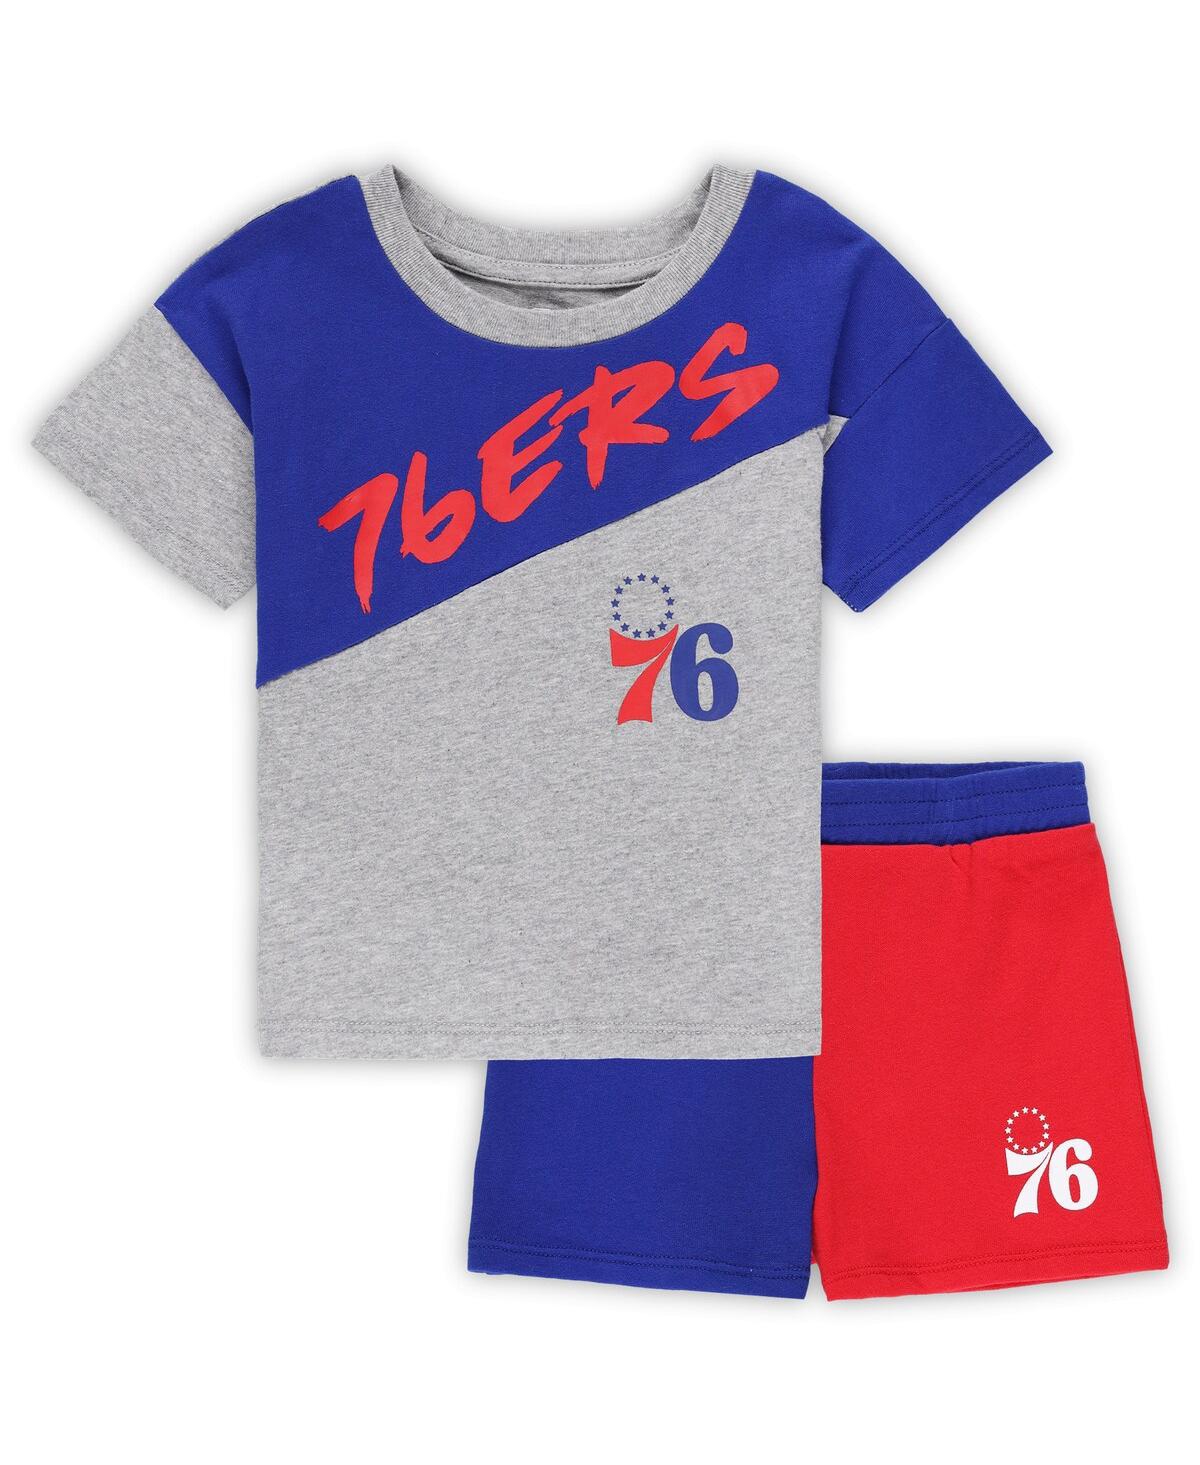 Outerstuff Babies' Toddler Boys And Girls Royal, Gray Philadelphia 76ers Super Star T-shirt And Shorts Set In Royal,gray